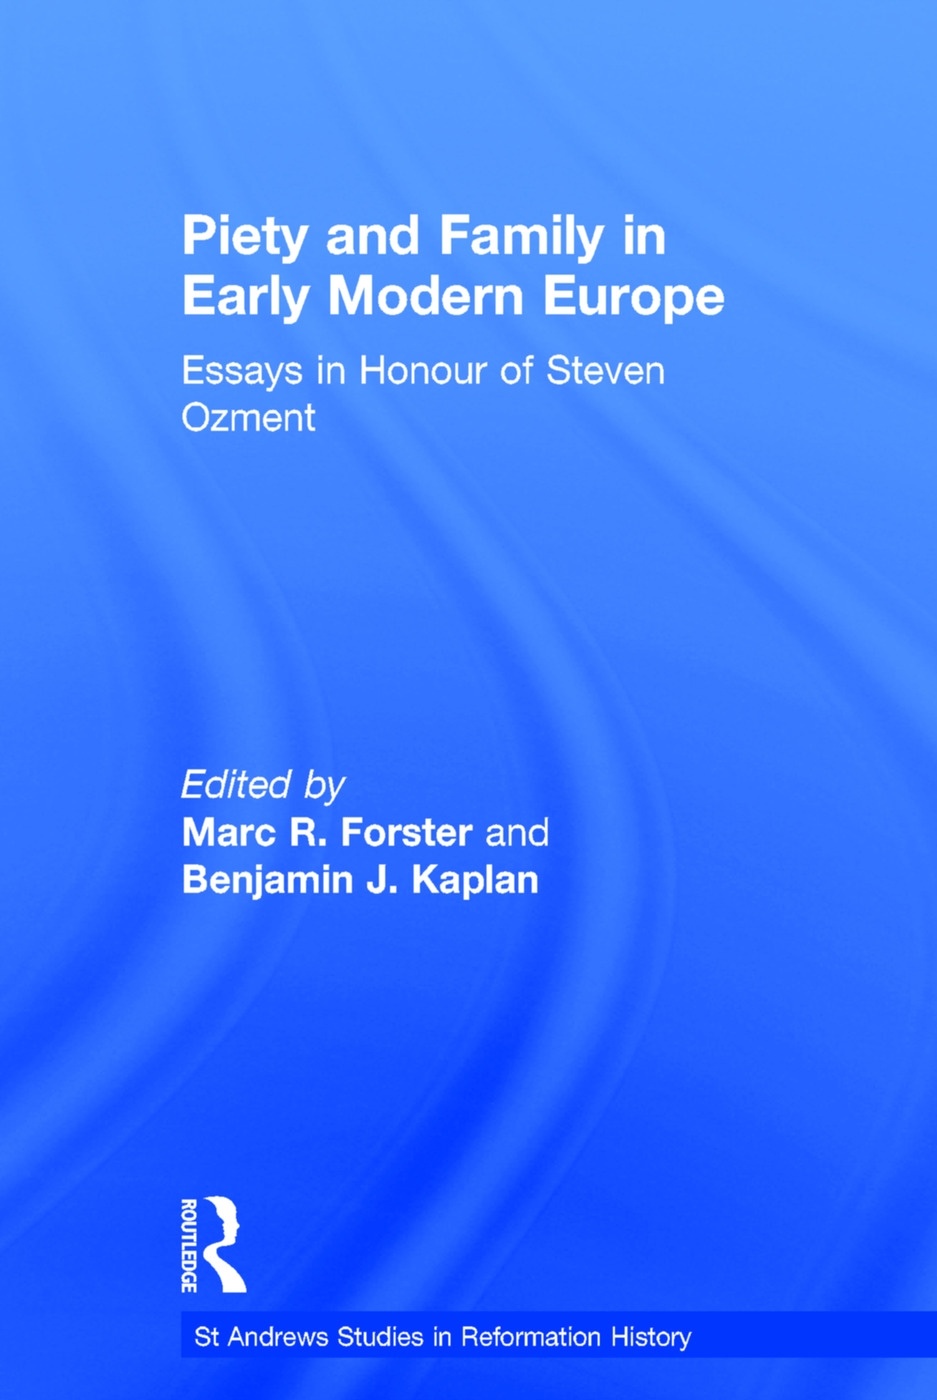 Piety and Family in Early Modern Europe: Essays in Honour of Steven Ozment